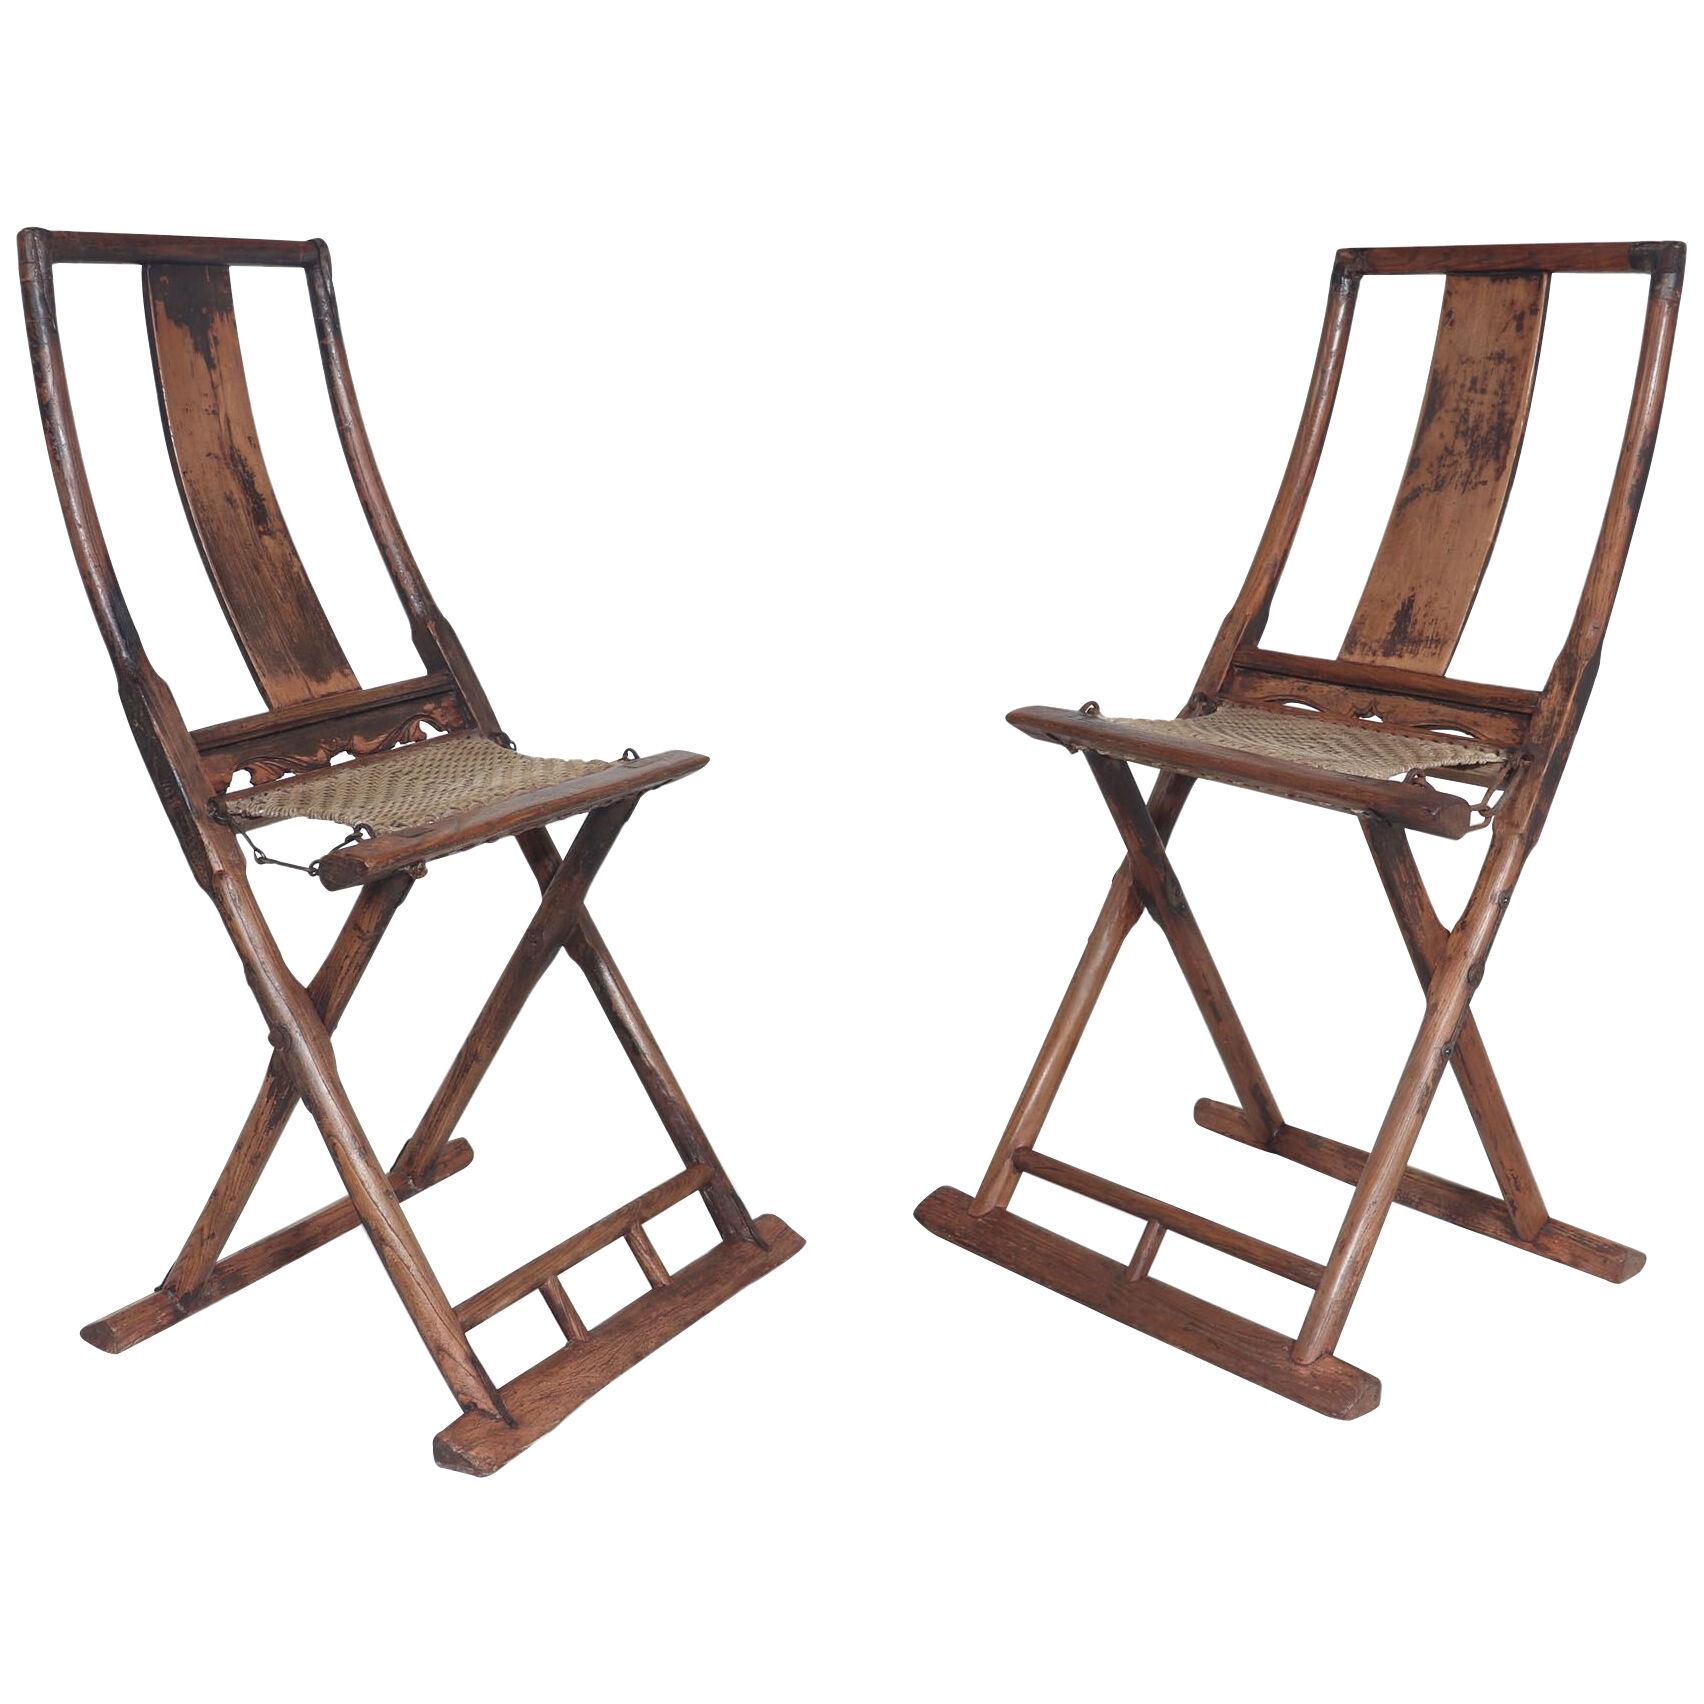 PAIR OF 17TH CENTURY CHINESE FOLDING TRAVELING CHAIRS